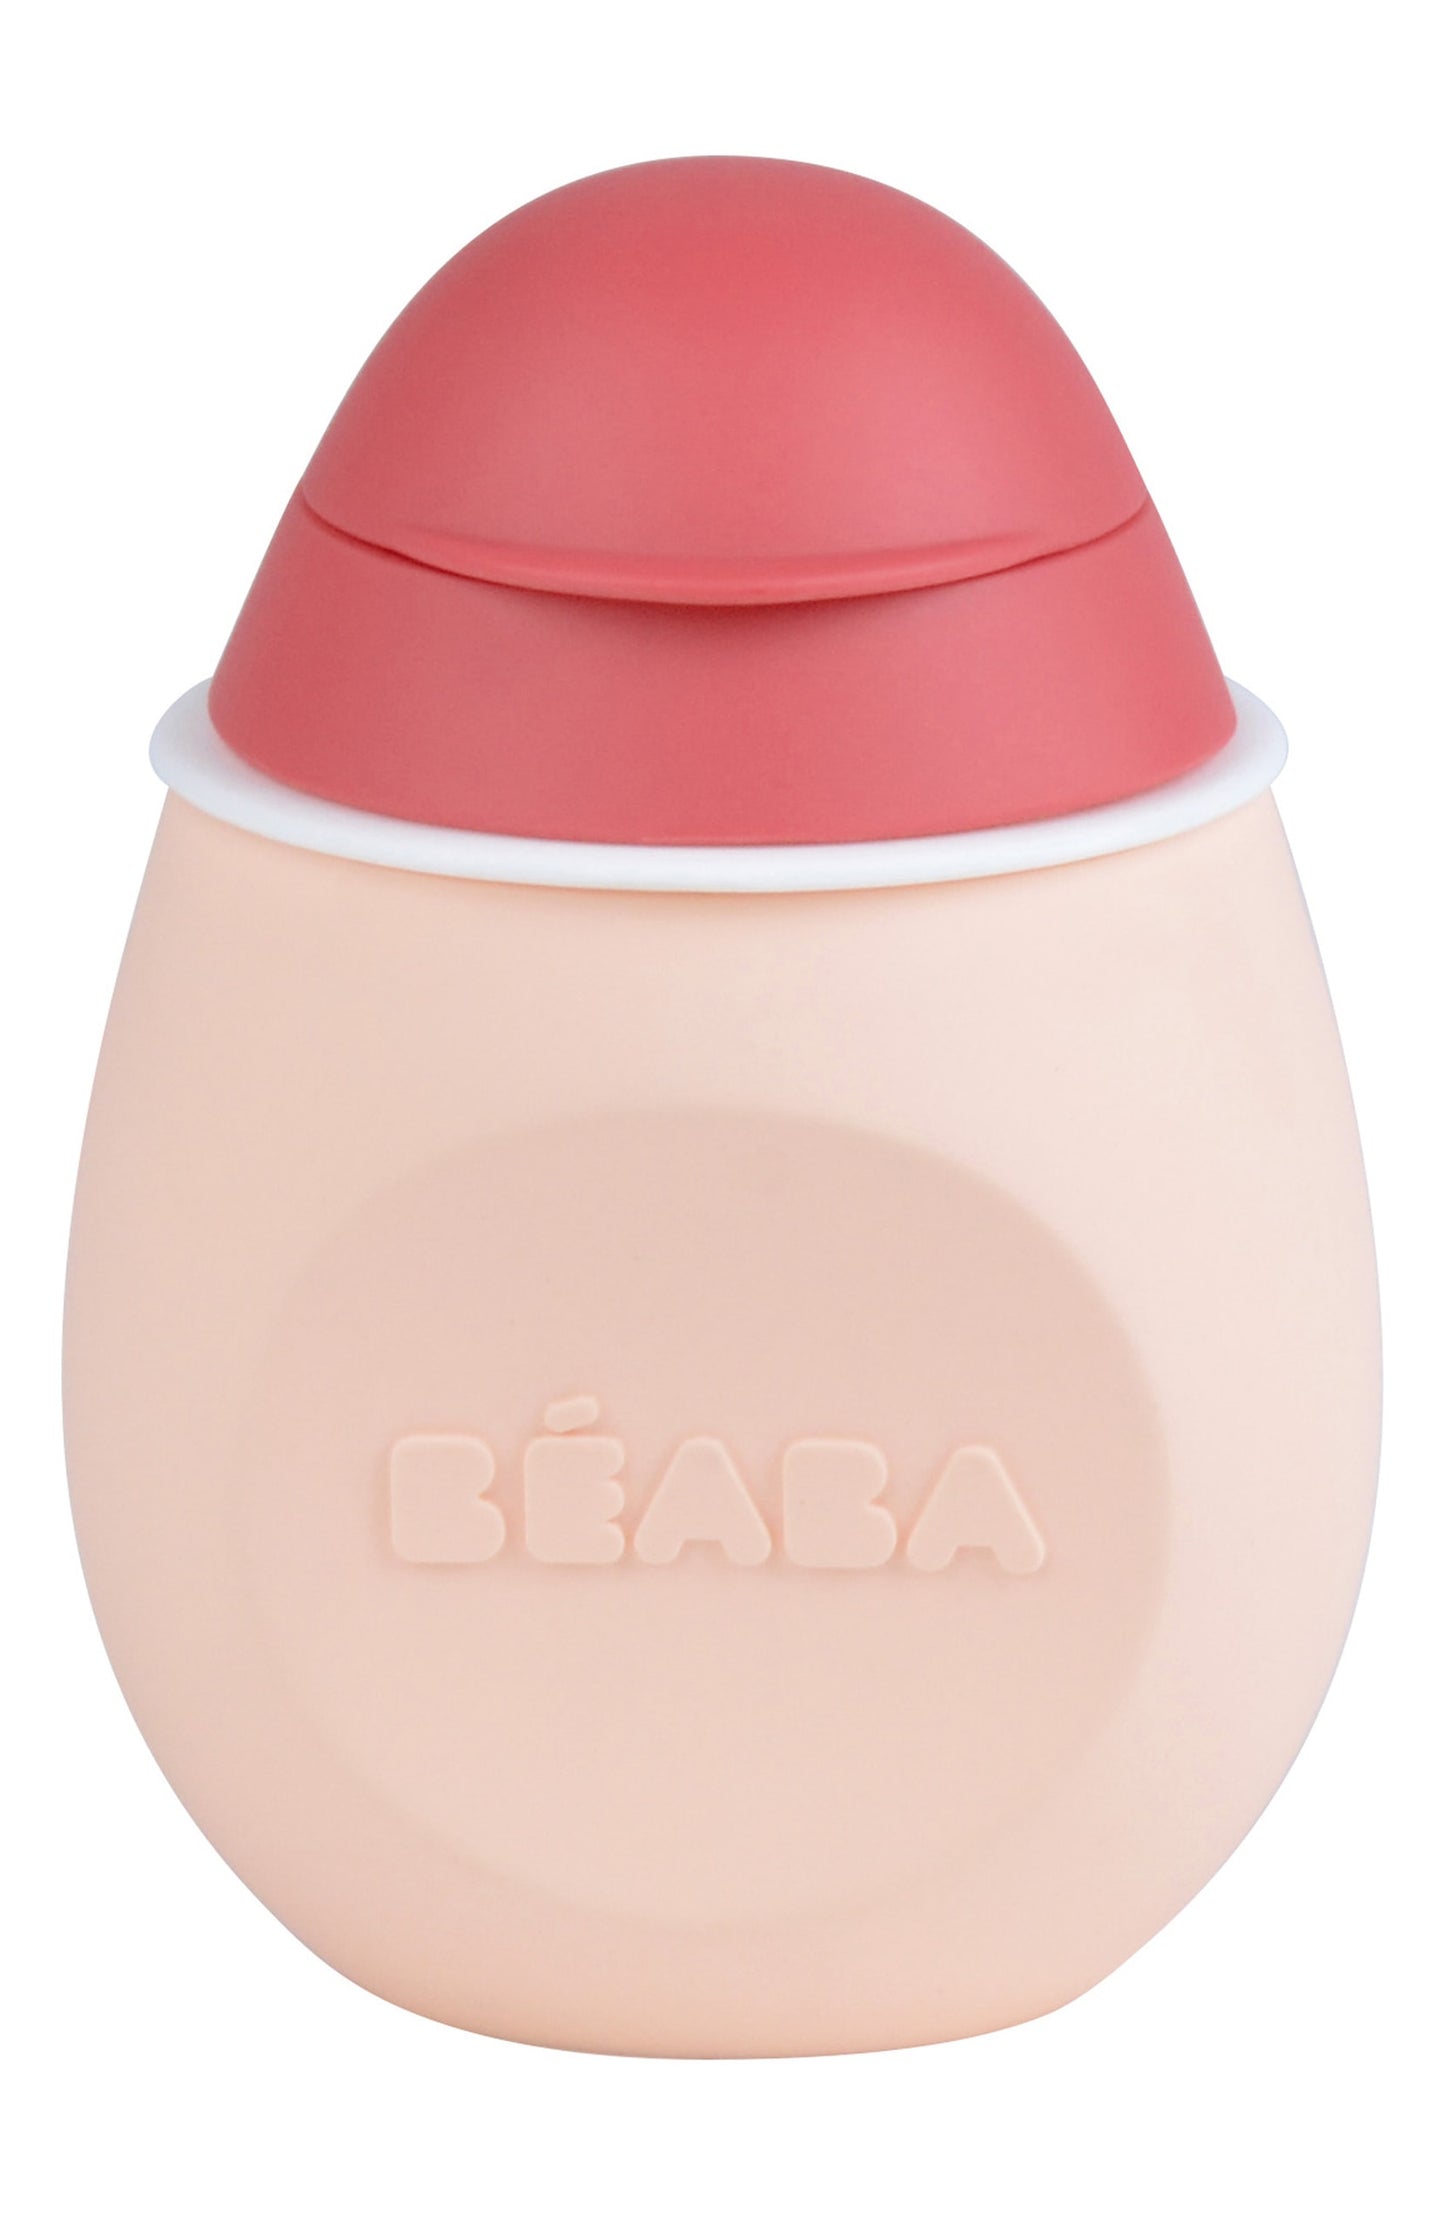 Beaba Baby Squeez pink